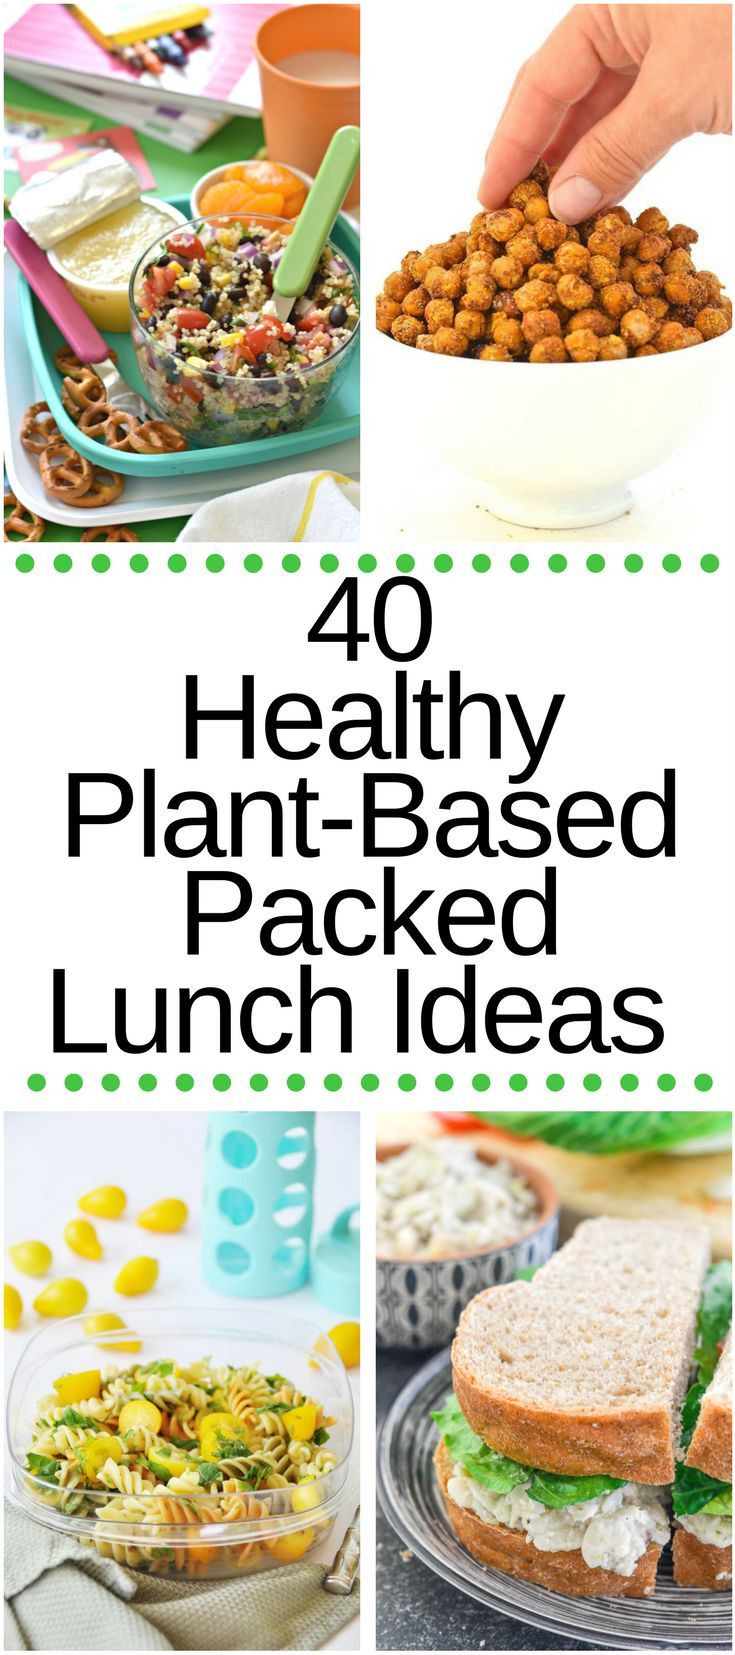 Easy Healthy Packed Lunches
 80 best Snack & Lunchbox Ideas images on Pinterest